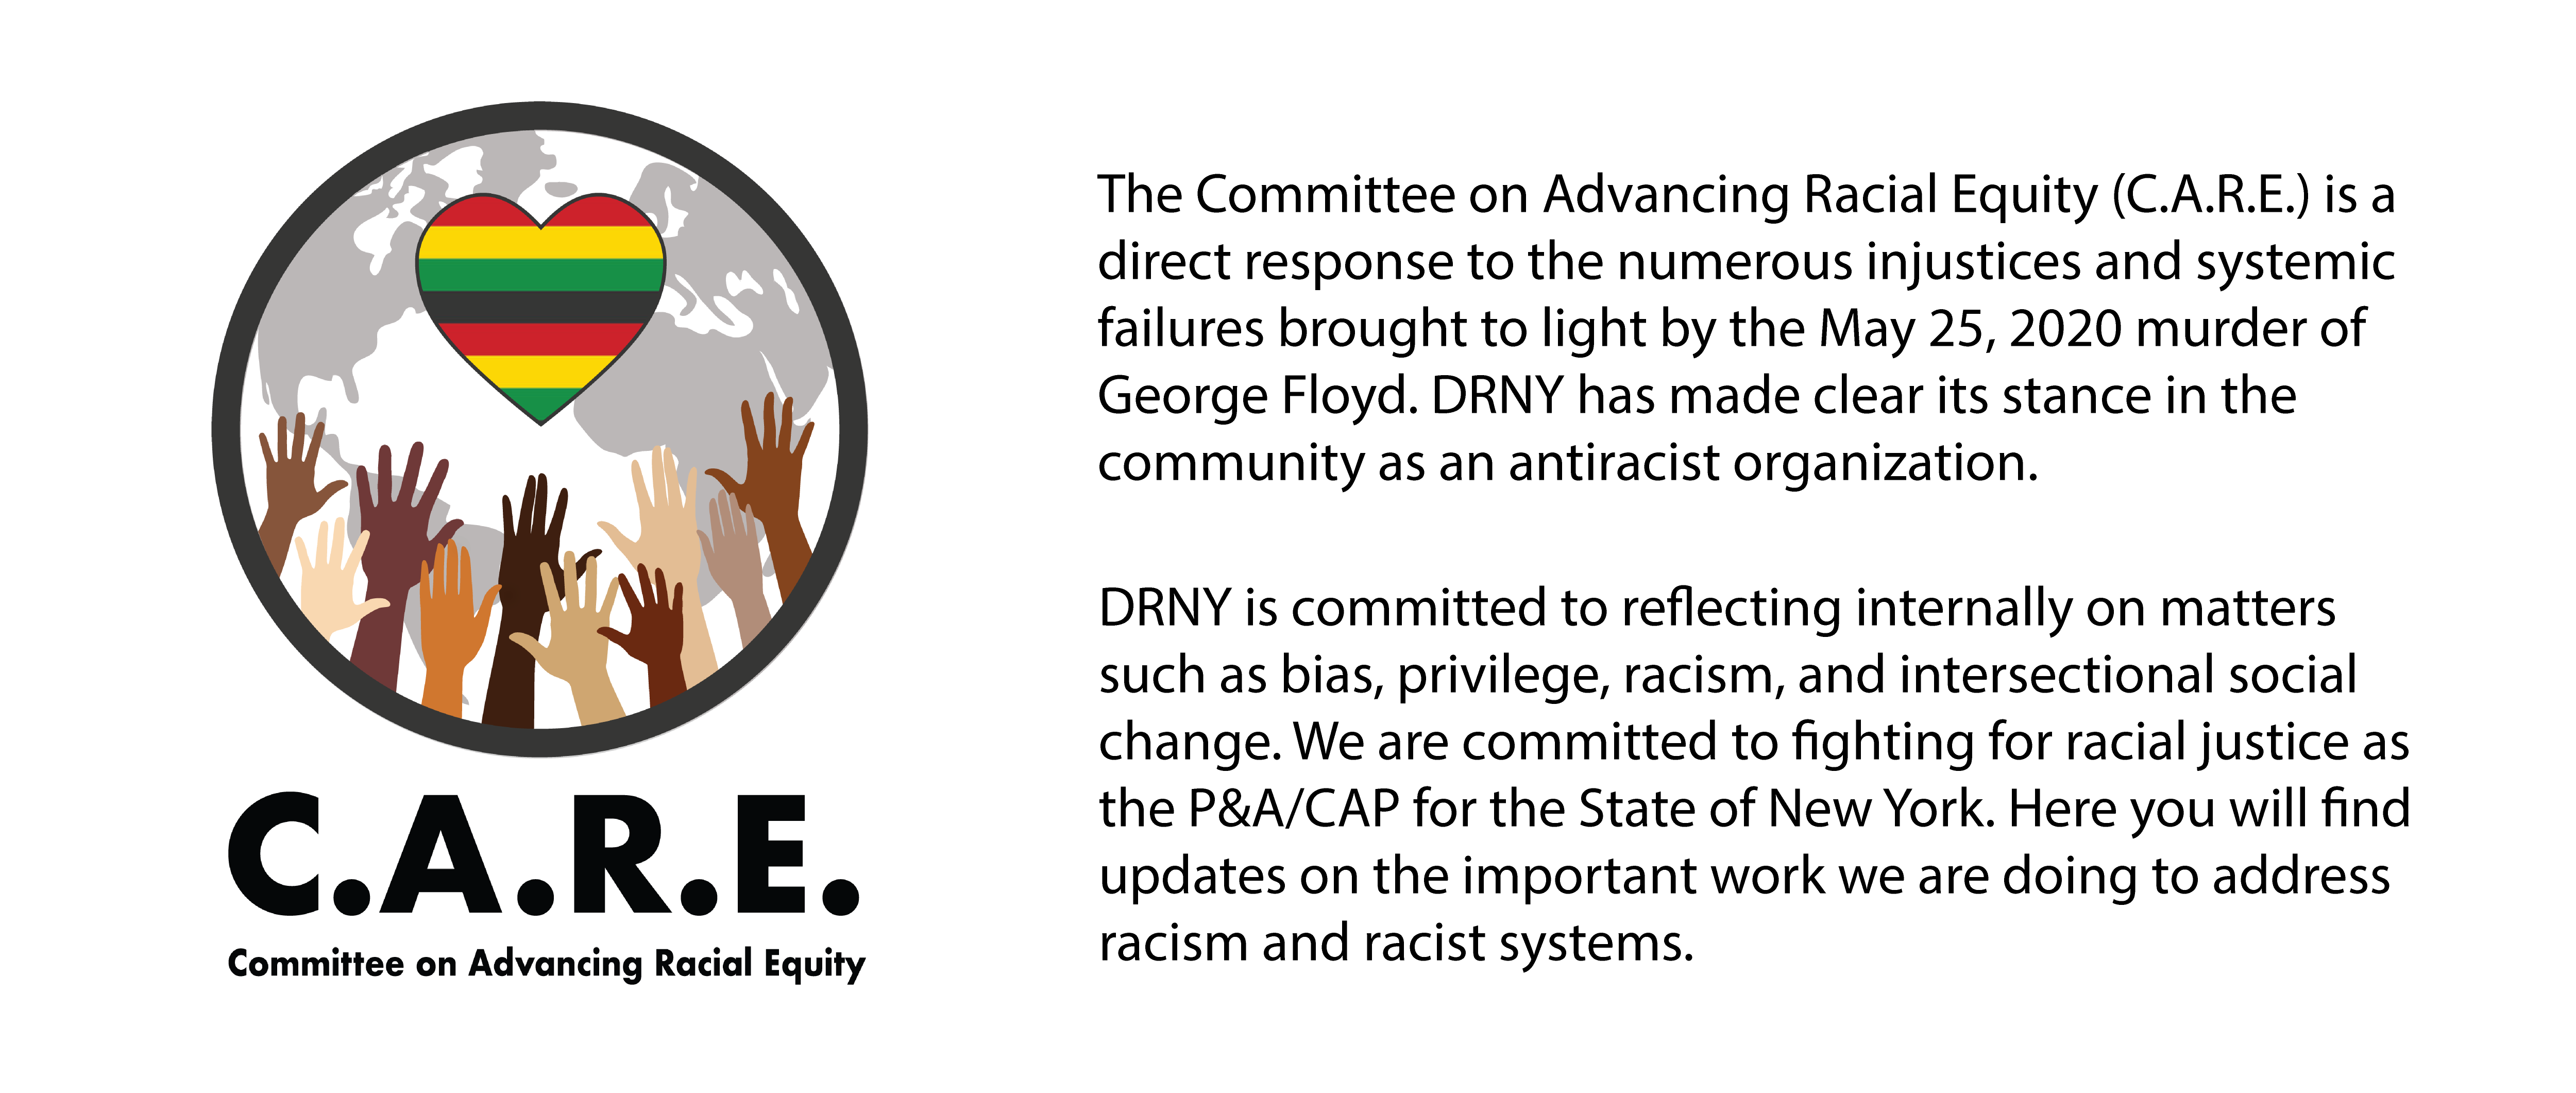 The Committee on Advancing Racial Equity (C.A.R.E.) is a direct response to the numerous injustices and systemic failures brought to light by the May 25, 2020 murder of George Floyd.DRNY has made clear its stance in the community as an antiracist organization.  DRNY is committed to reflecting internally on matters such as bias, privilege, racism, and intersectional social change.  We are committed to fighting for racial justice as the P&A/CAP for the State of New York. Here you will find updates on the important work we are doing to address racism and racist systems. 